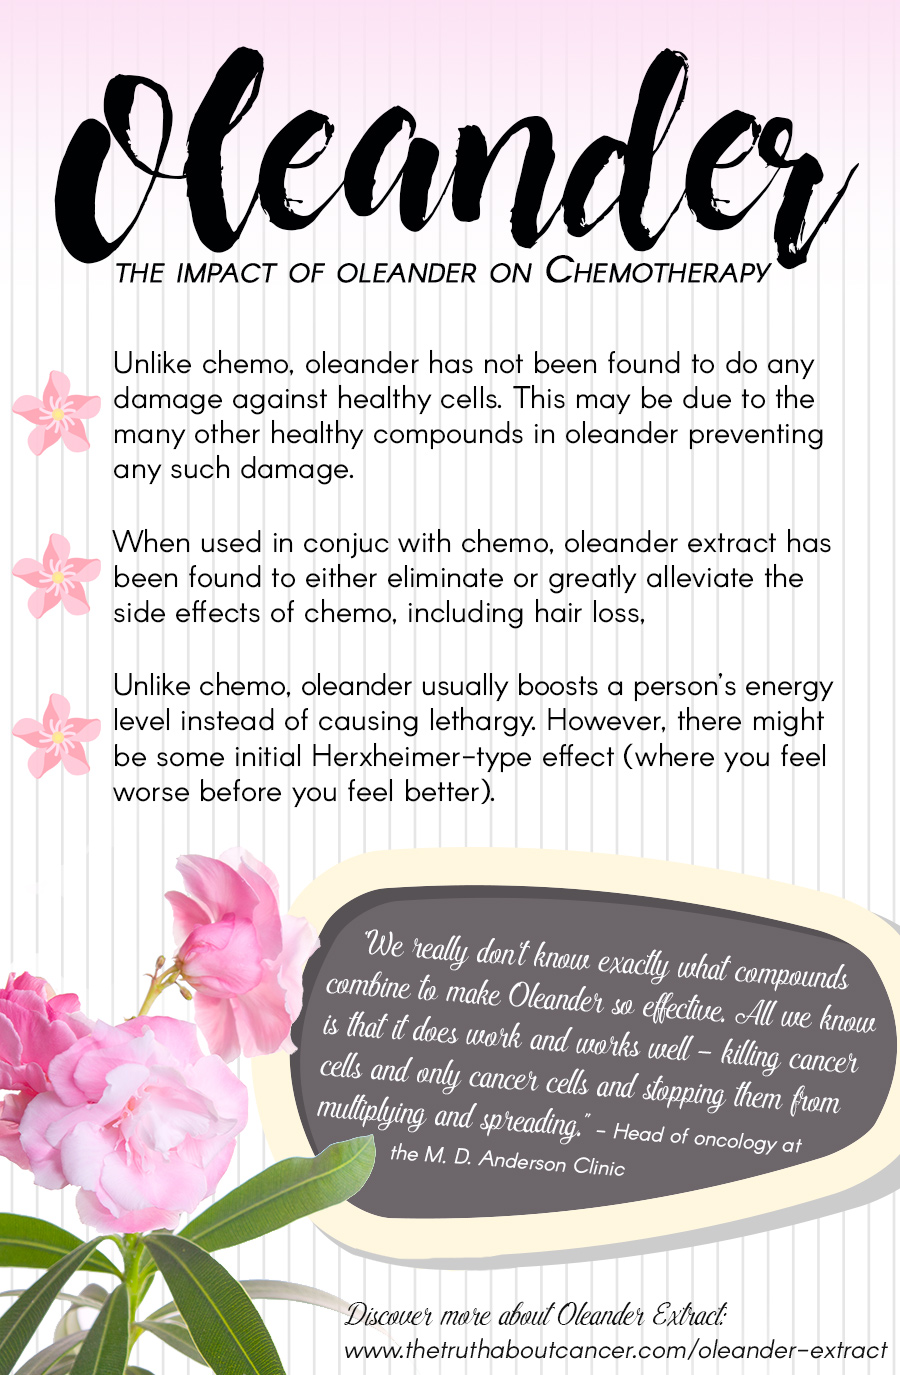 The Impact of Oleander on Chemotherapy